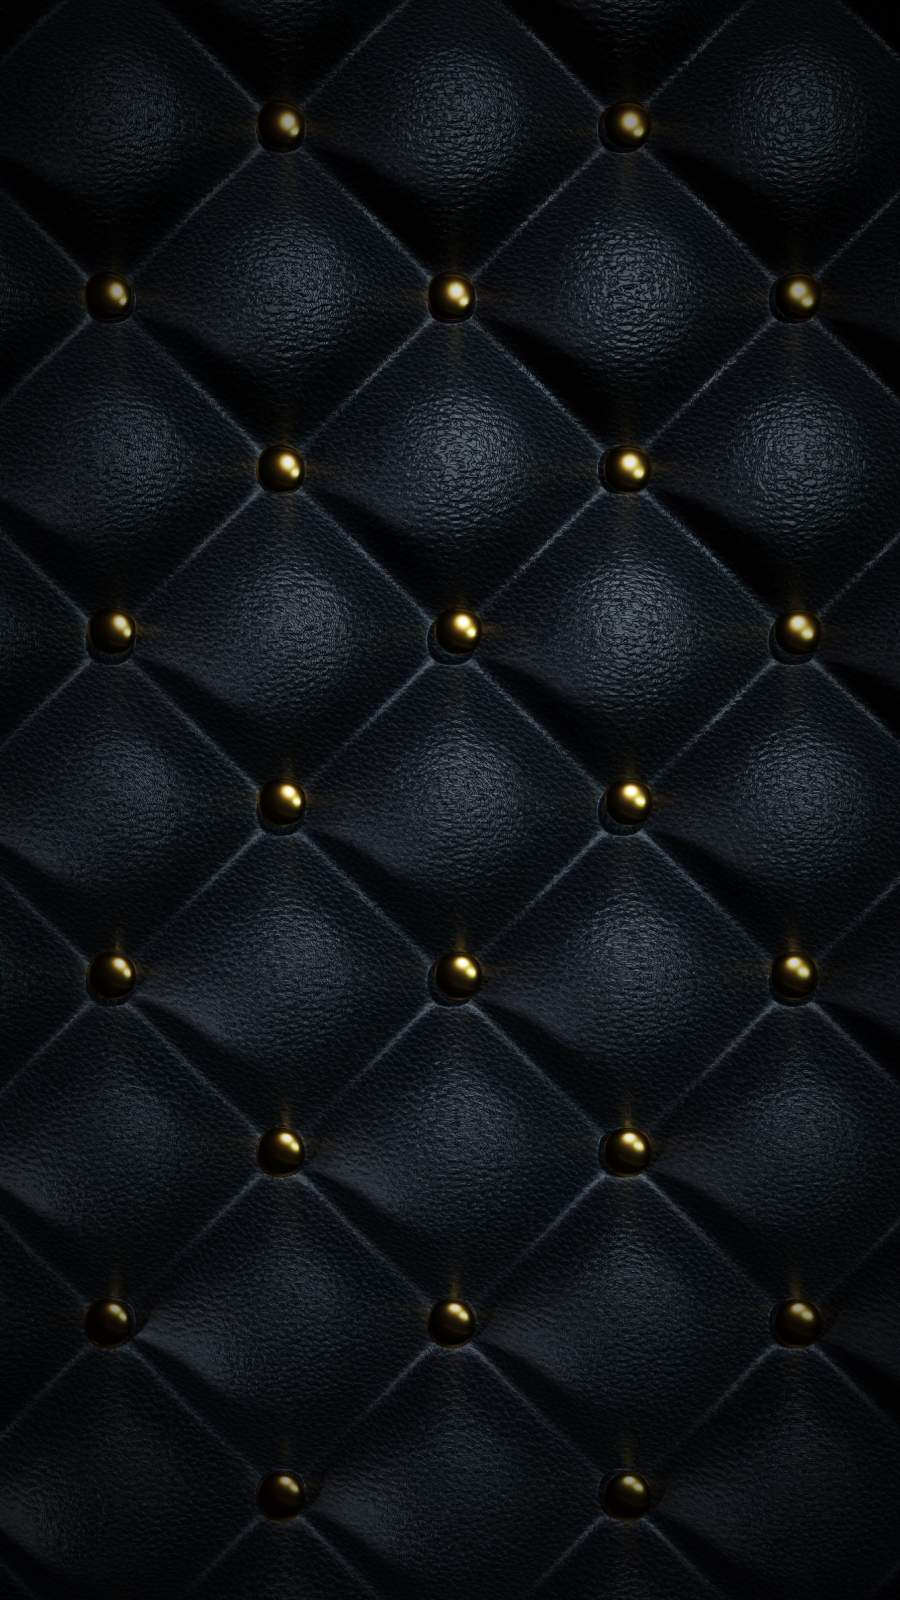 Black Leather iPhone Wallpapers  Top Free Black Leather iPhone Backgrounds   WallpaperAccess